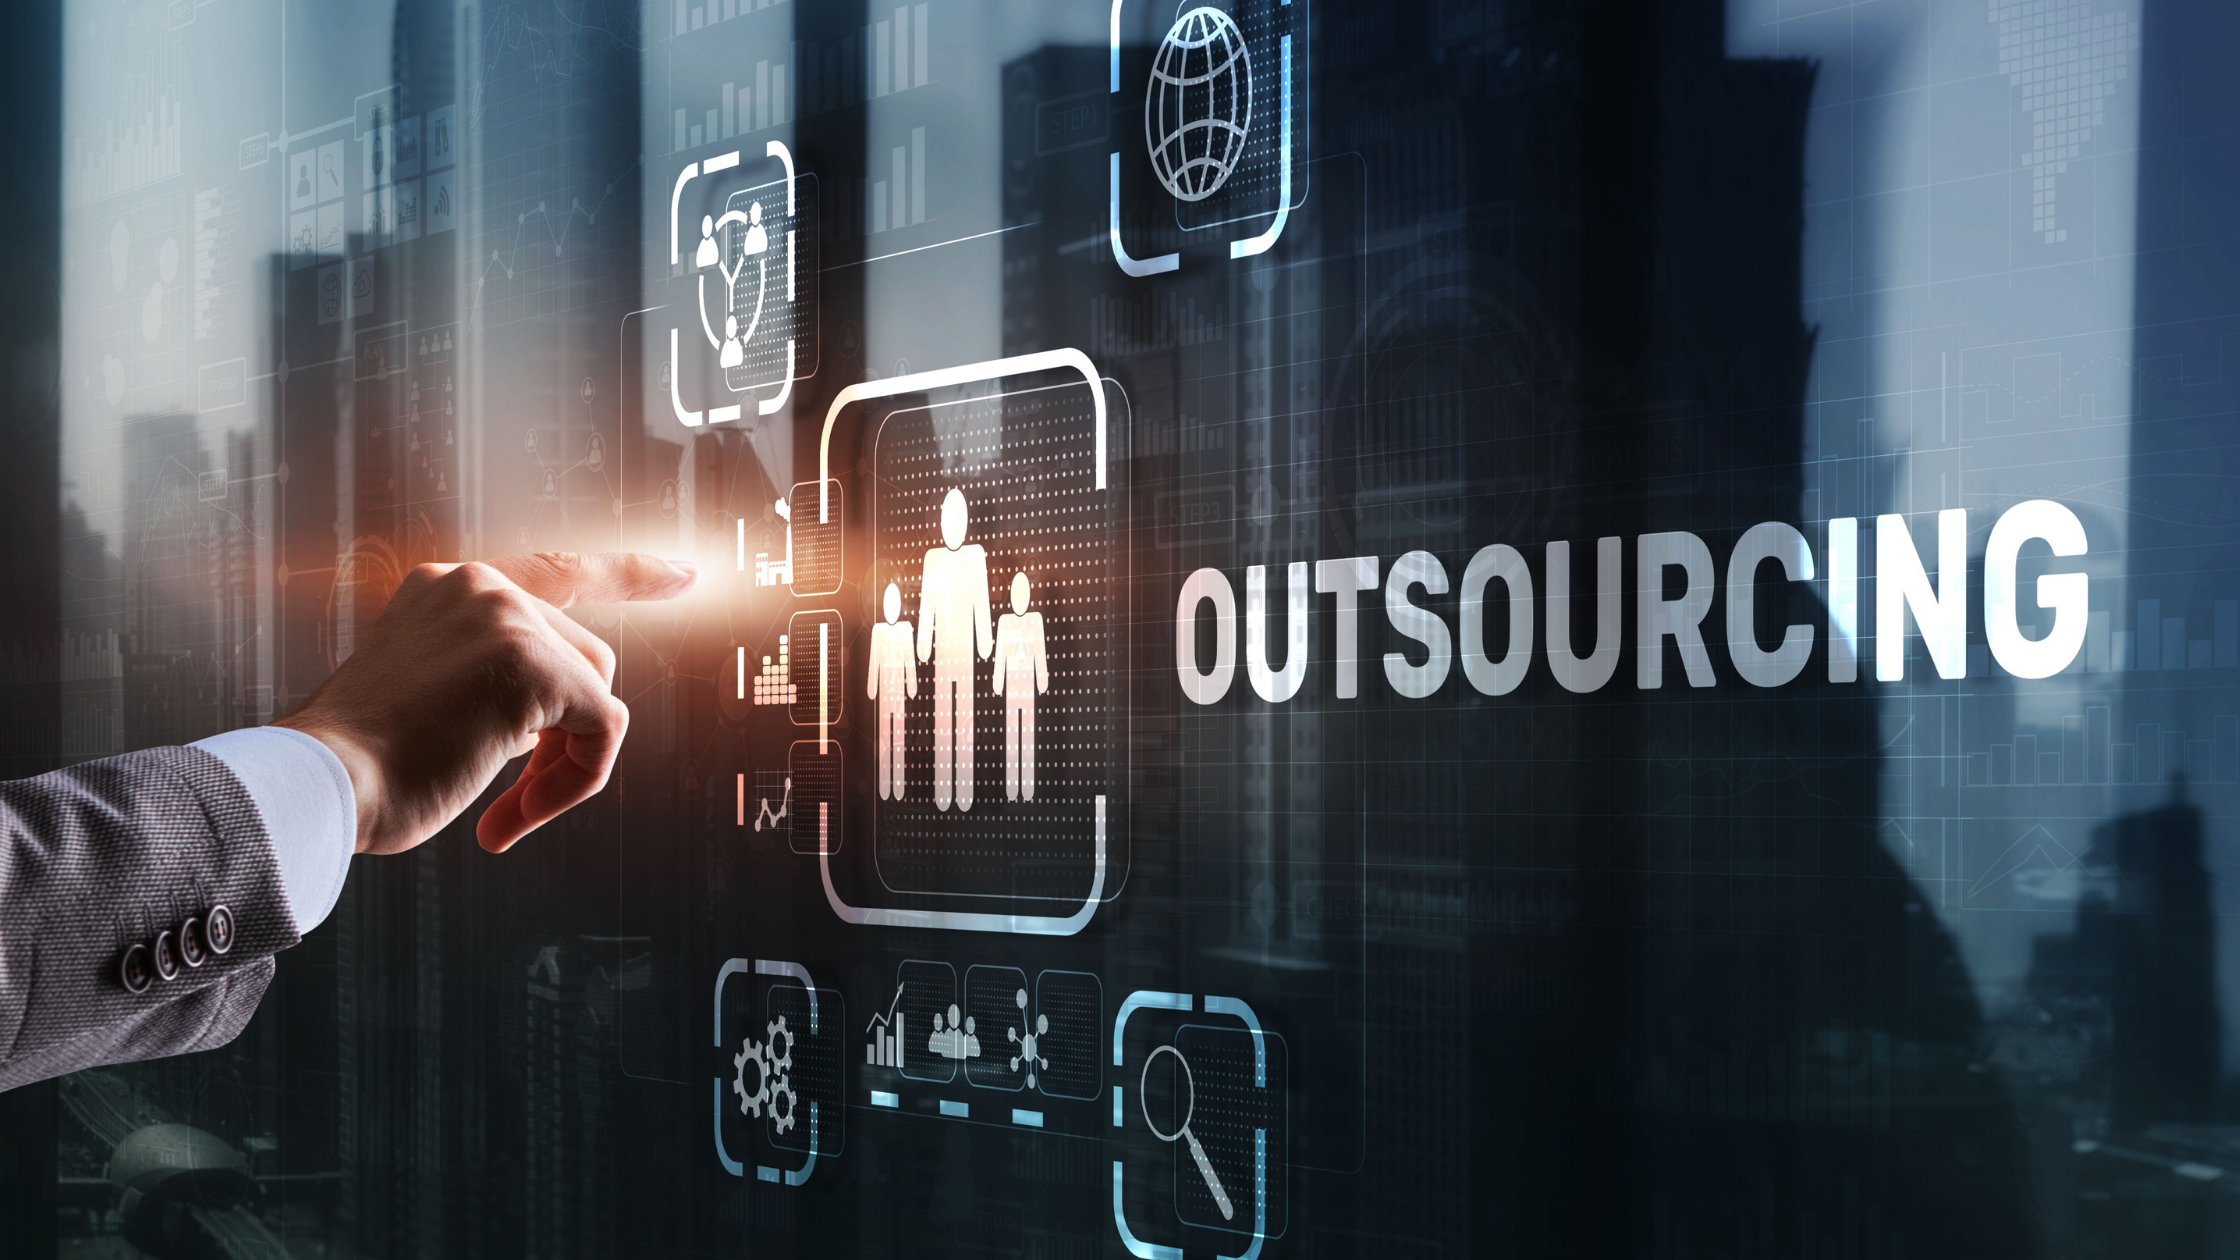 Benefits of Outsourcing to a Digital Marketing Agency: Focus on Core Business